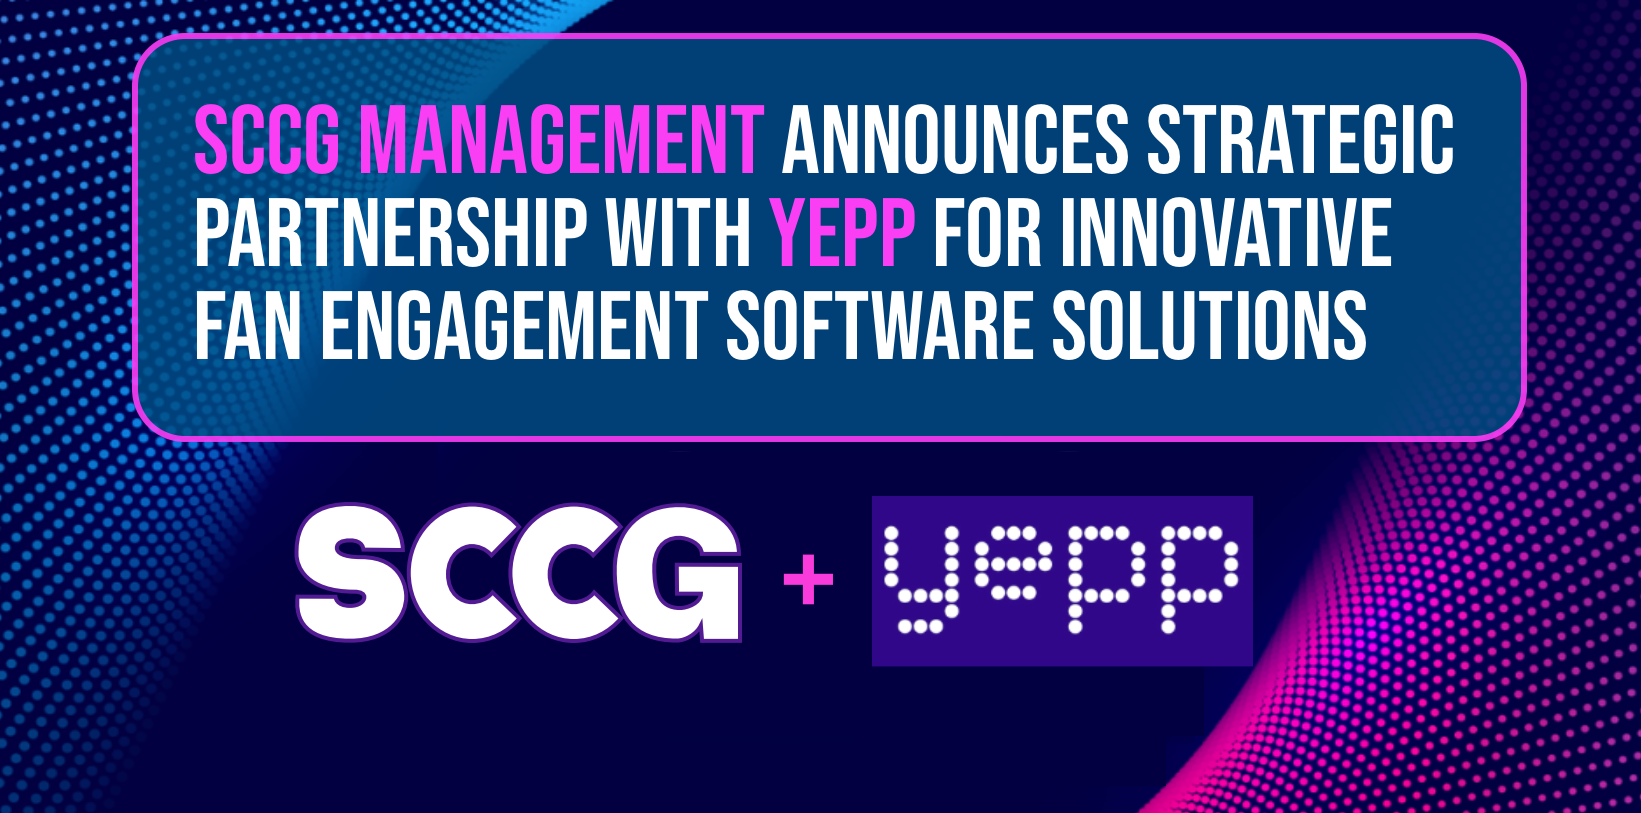 sccg-management-announces-strategic-partnership-with-yepp-for-innovative-fan-engagement-software-solutions